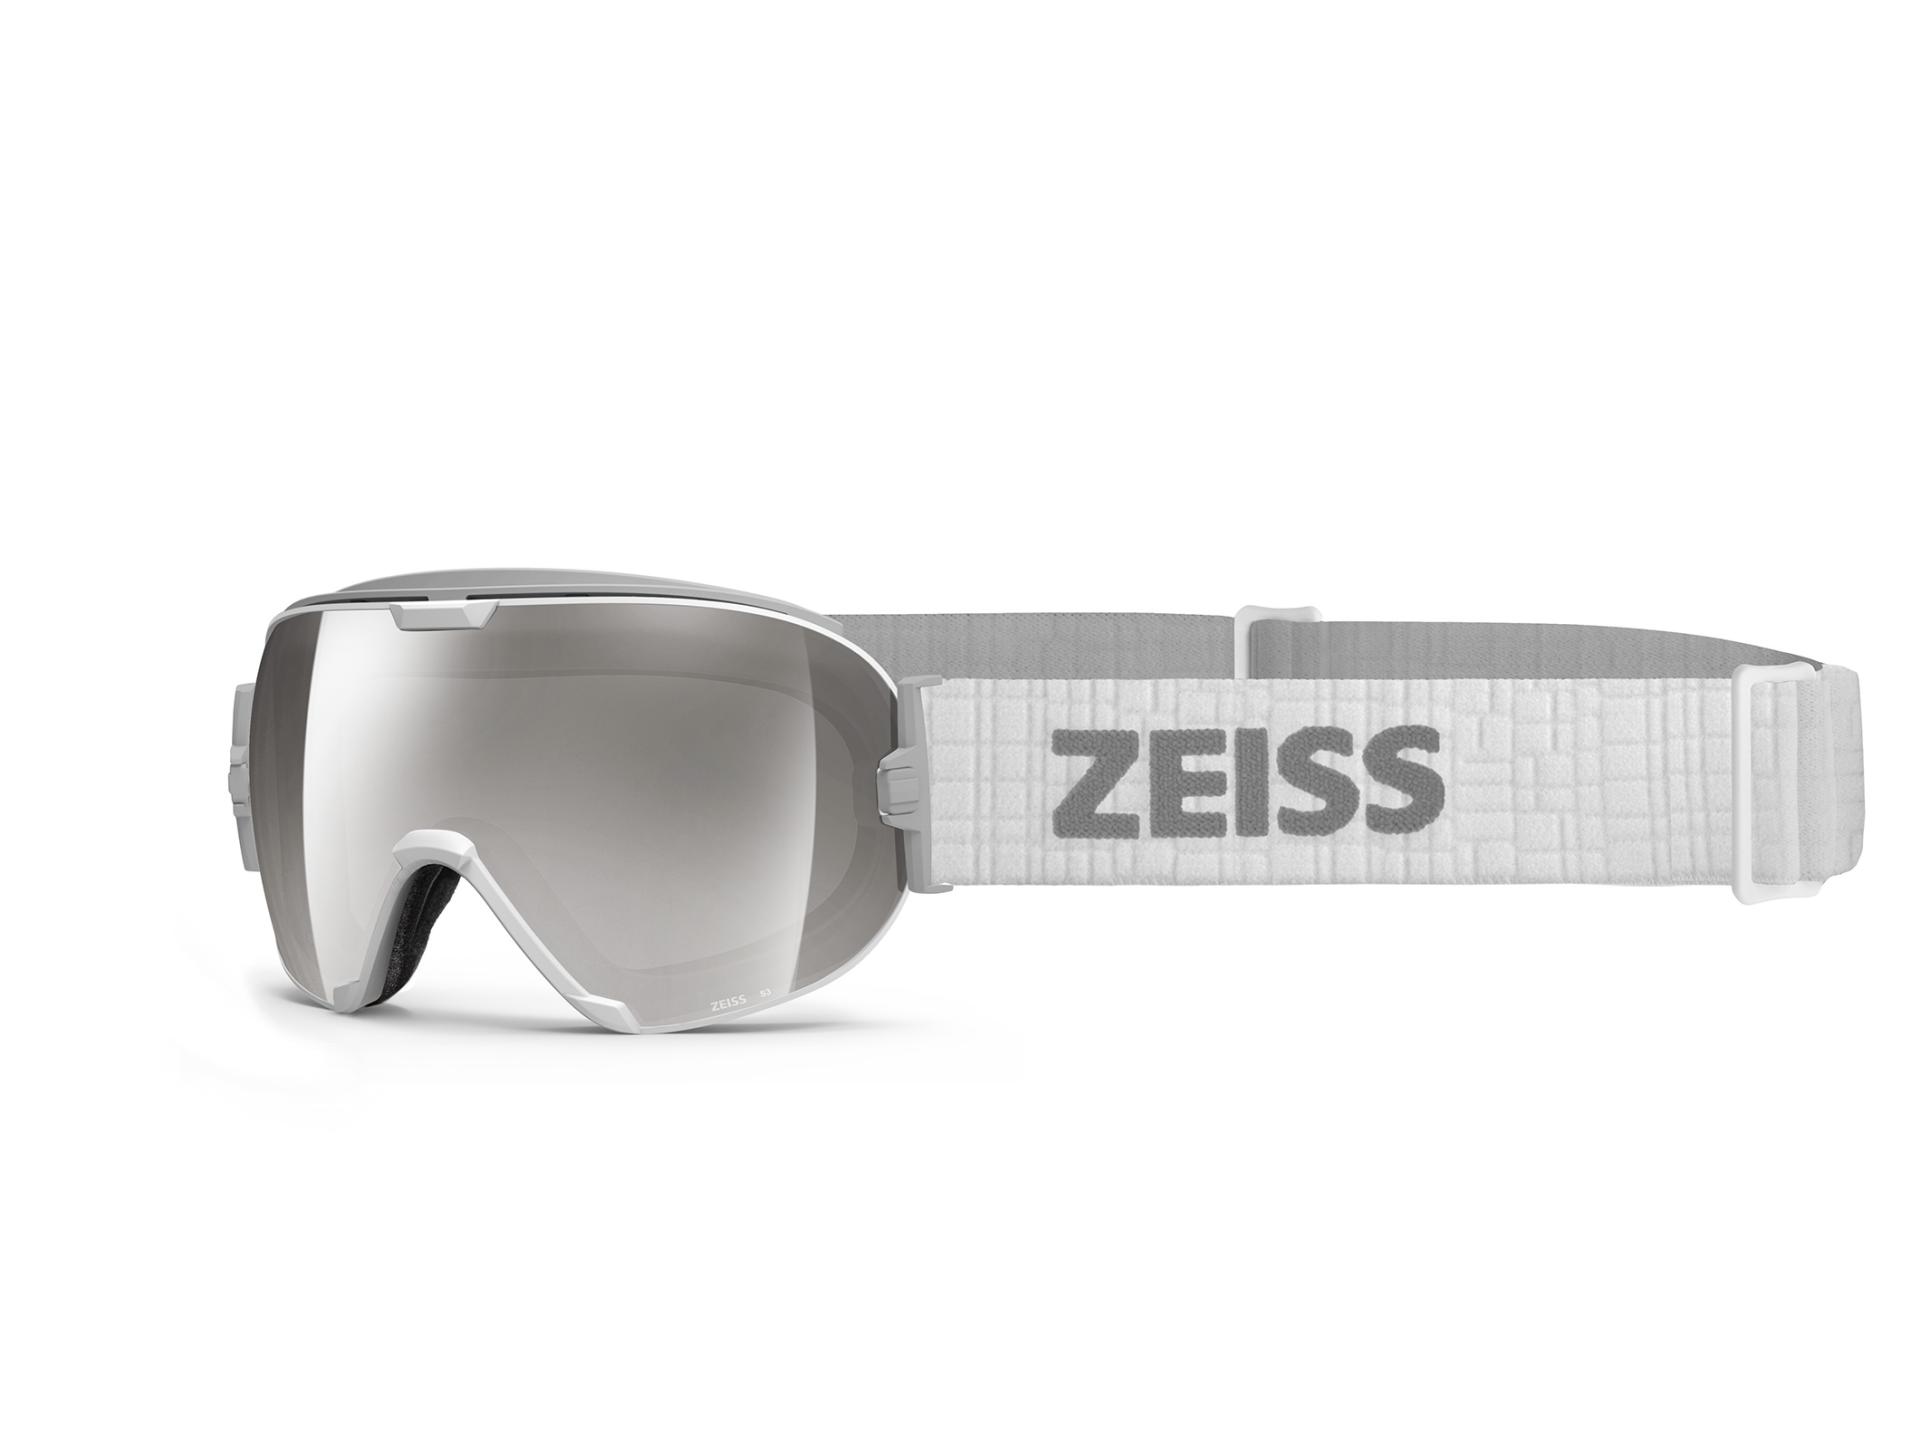 ZEISS snow goggle: Interchangeable Total White Super Silver